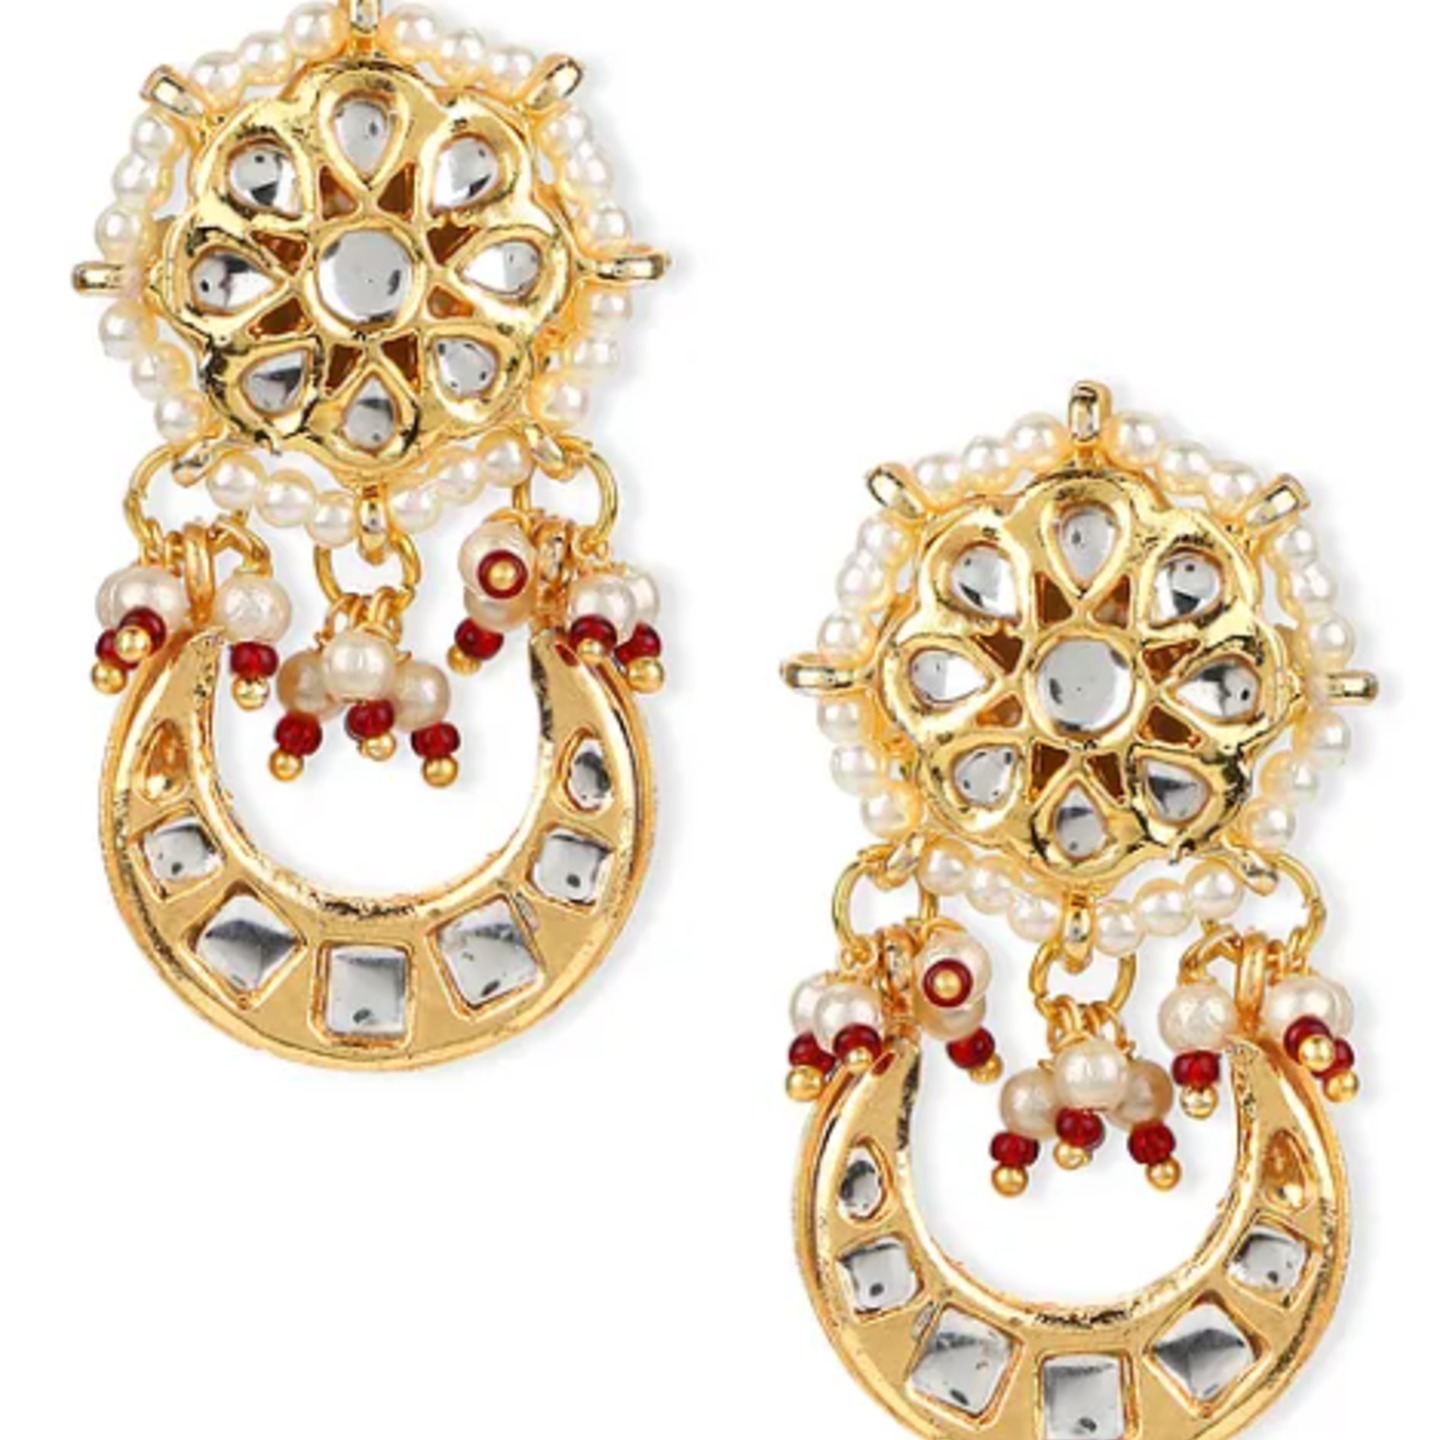 White Gold Tone Kundan Earrings with Pearls